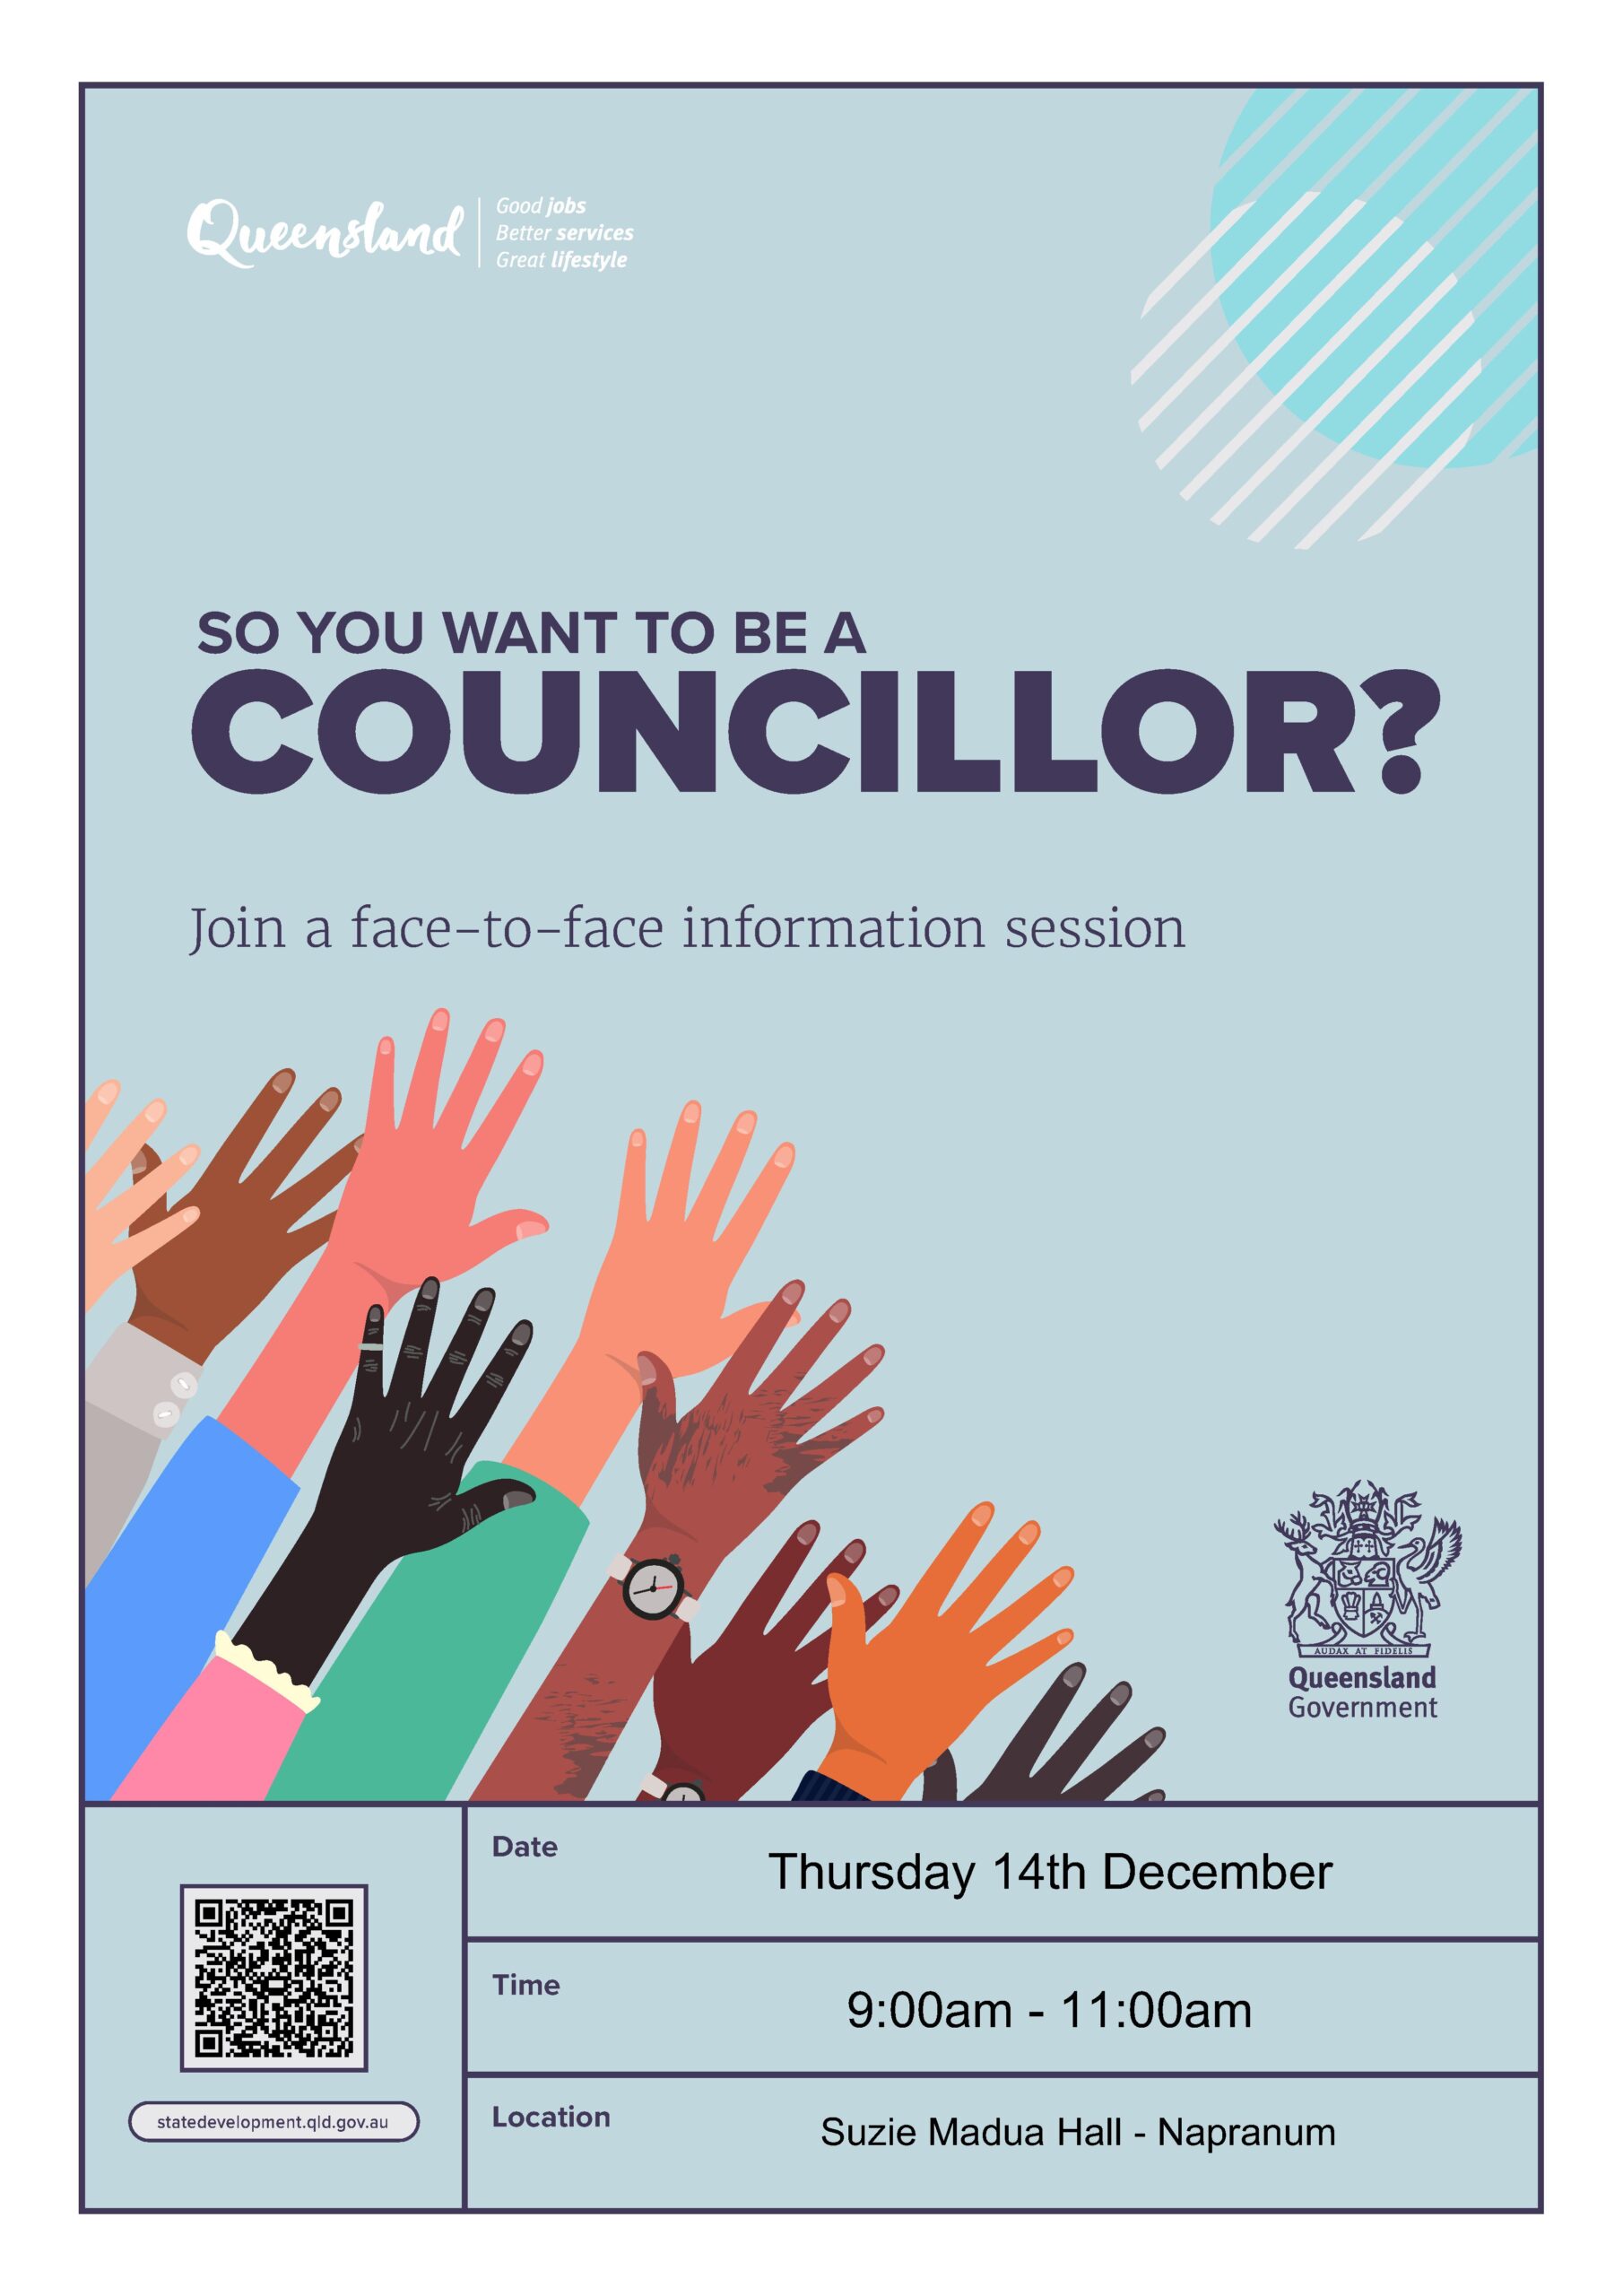 Want to be Councillor?